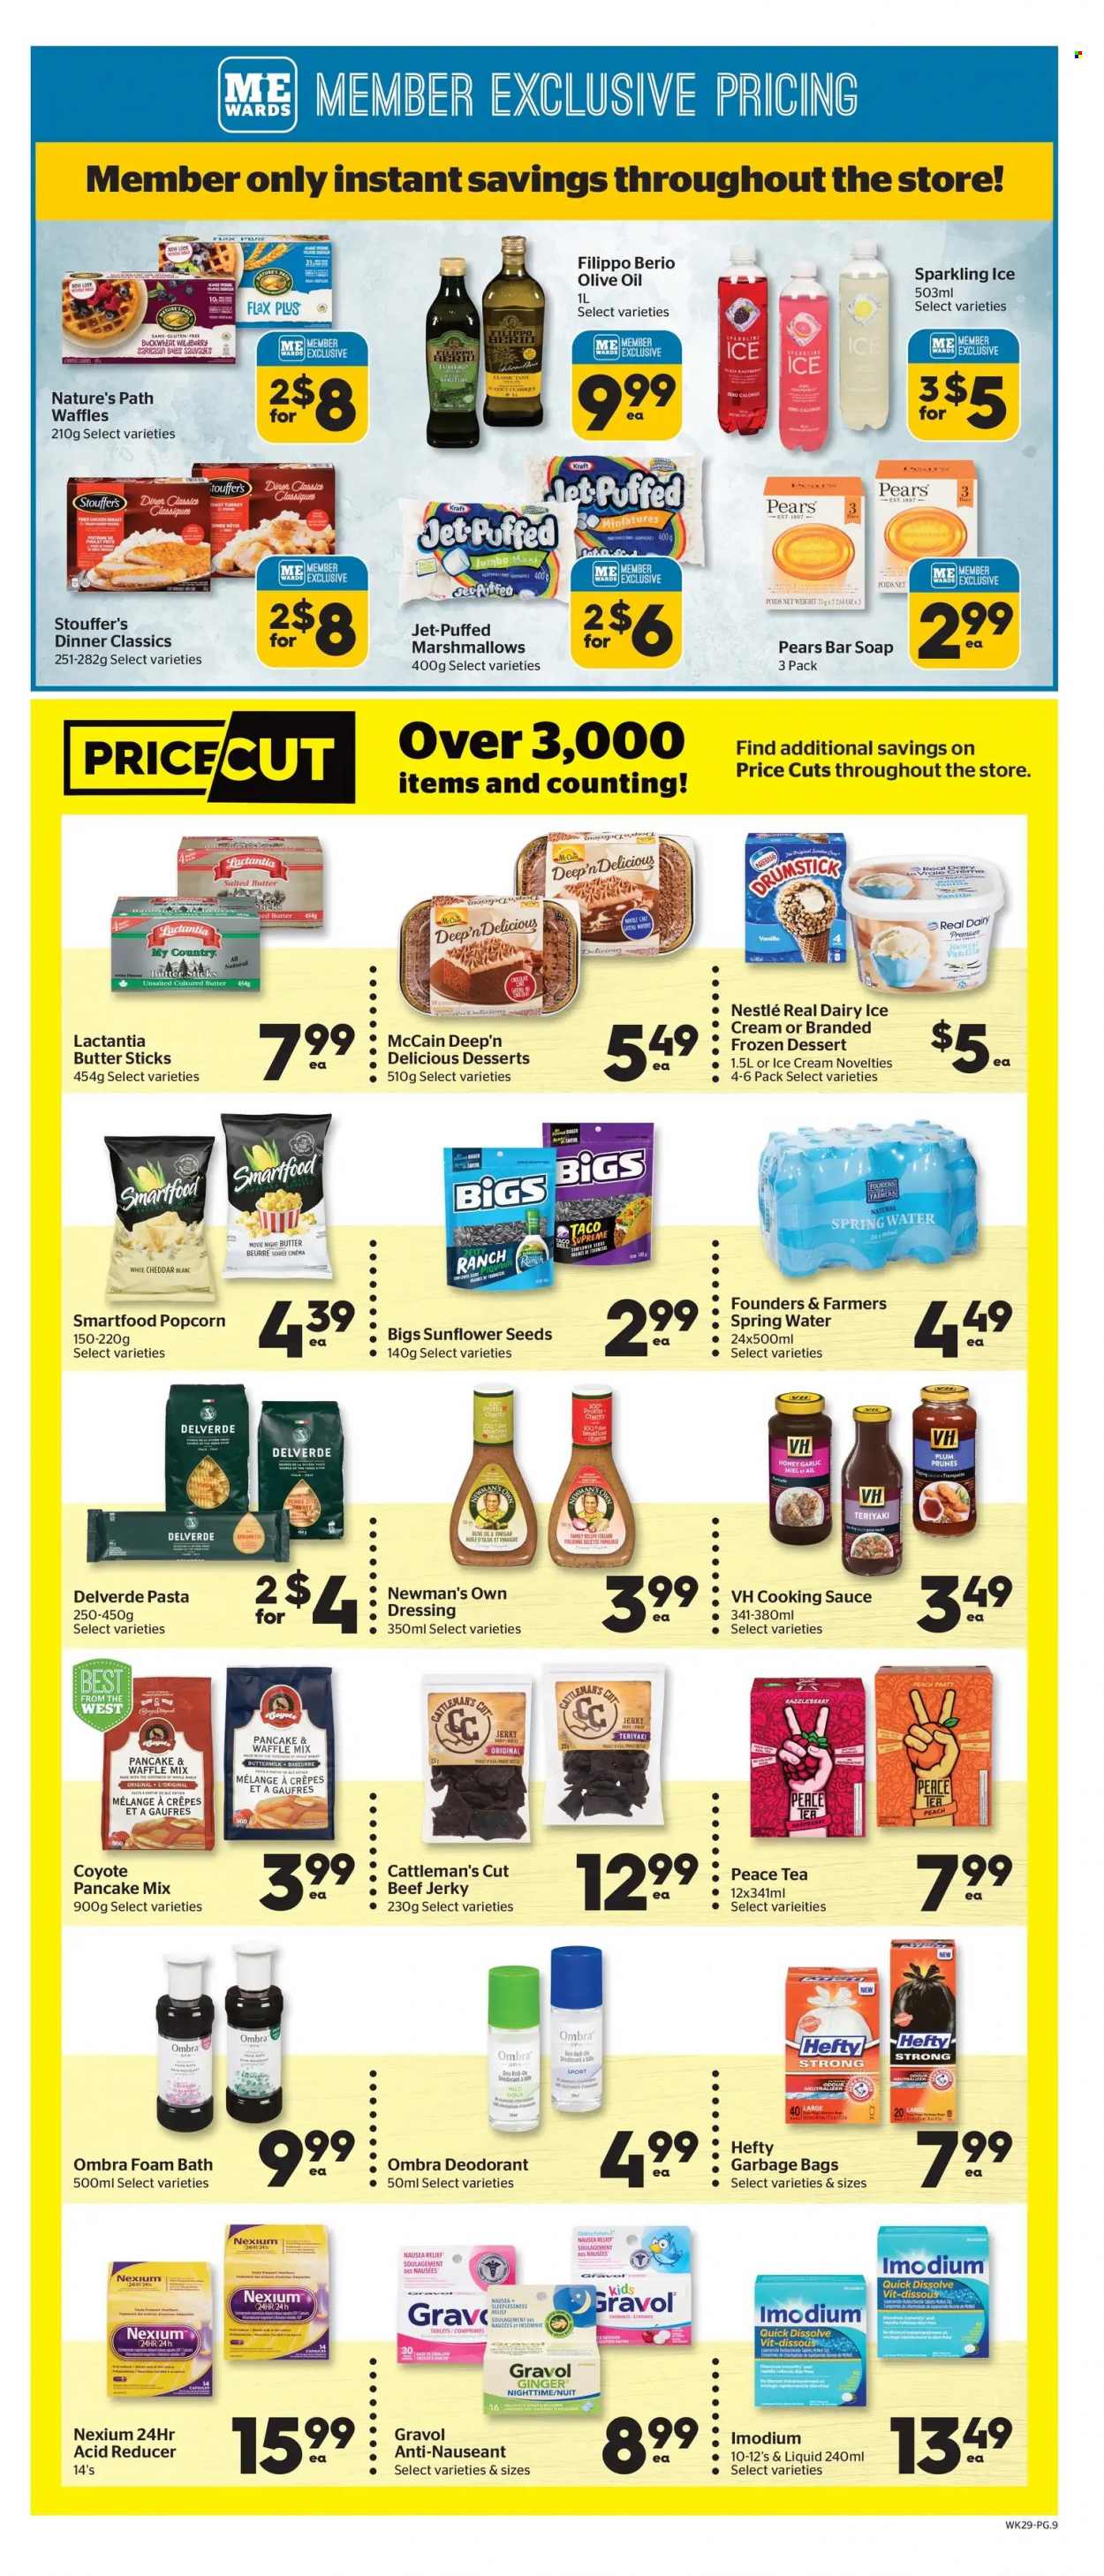 thumbnail - Calgary Co-op Flyer - May 19, 2022 - May 25, 2022 - Sales products - waffles, garlic, ginger, pears, pasta, sauce, pancakes, Kraft®, beef jerky, jerky, cheddar, buttermilk, salted butter, ice cream, Stouffer's, McCain, marshmallows, Smartfood, popcorn, buckwheat, dressing, vinegar, olive oil, oil, honey, prunes, dried fruit, sunflower seeds, spring water, tea, Jet, bath foam, soap bar, soap, anti-perspirant, Hefty, Nexium, Nestlé, Imodium, deodorant. Page 12.